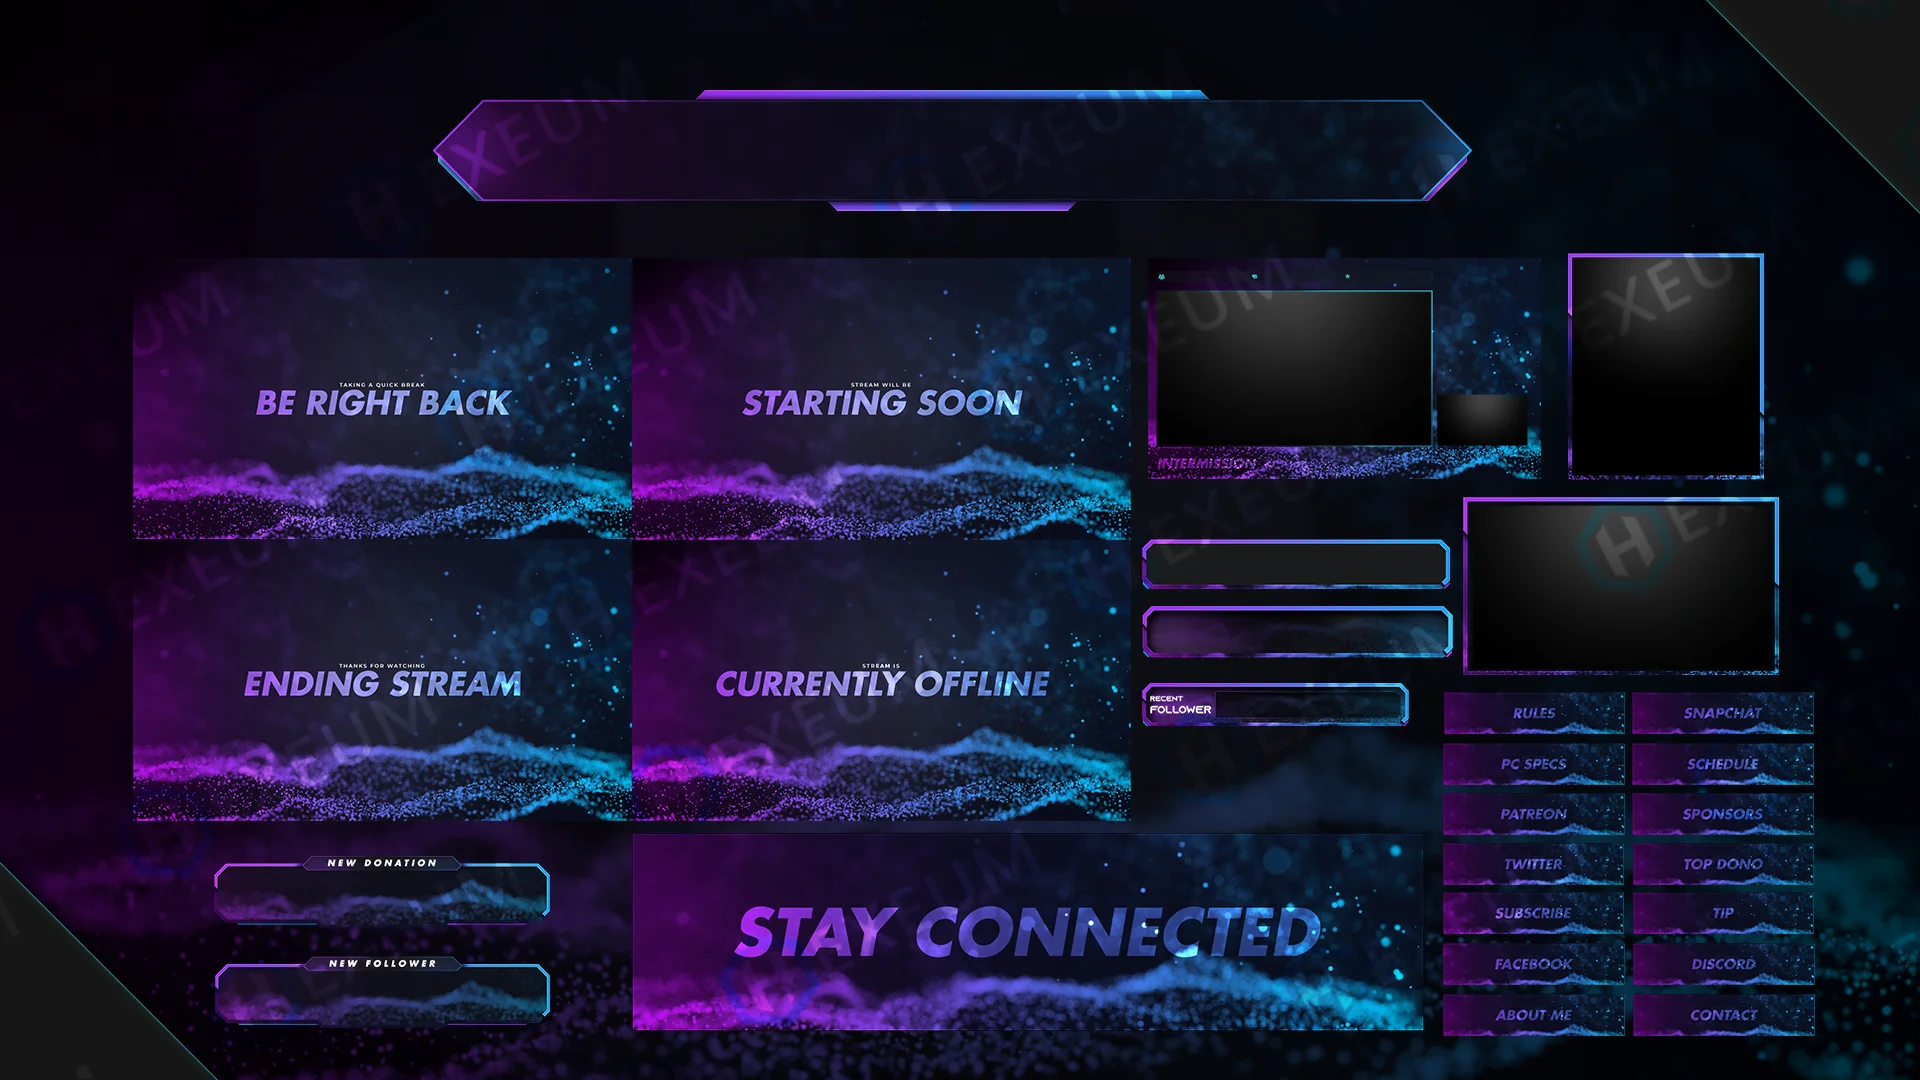 Stream Overlay - NocturnTheWolf Just Chatting 2 by